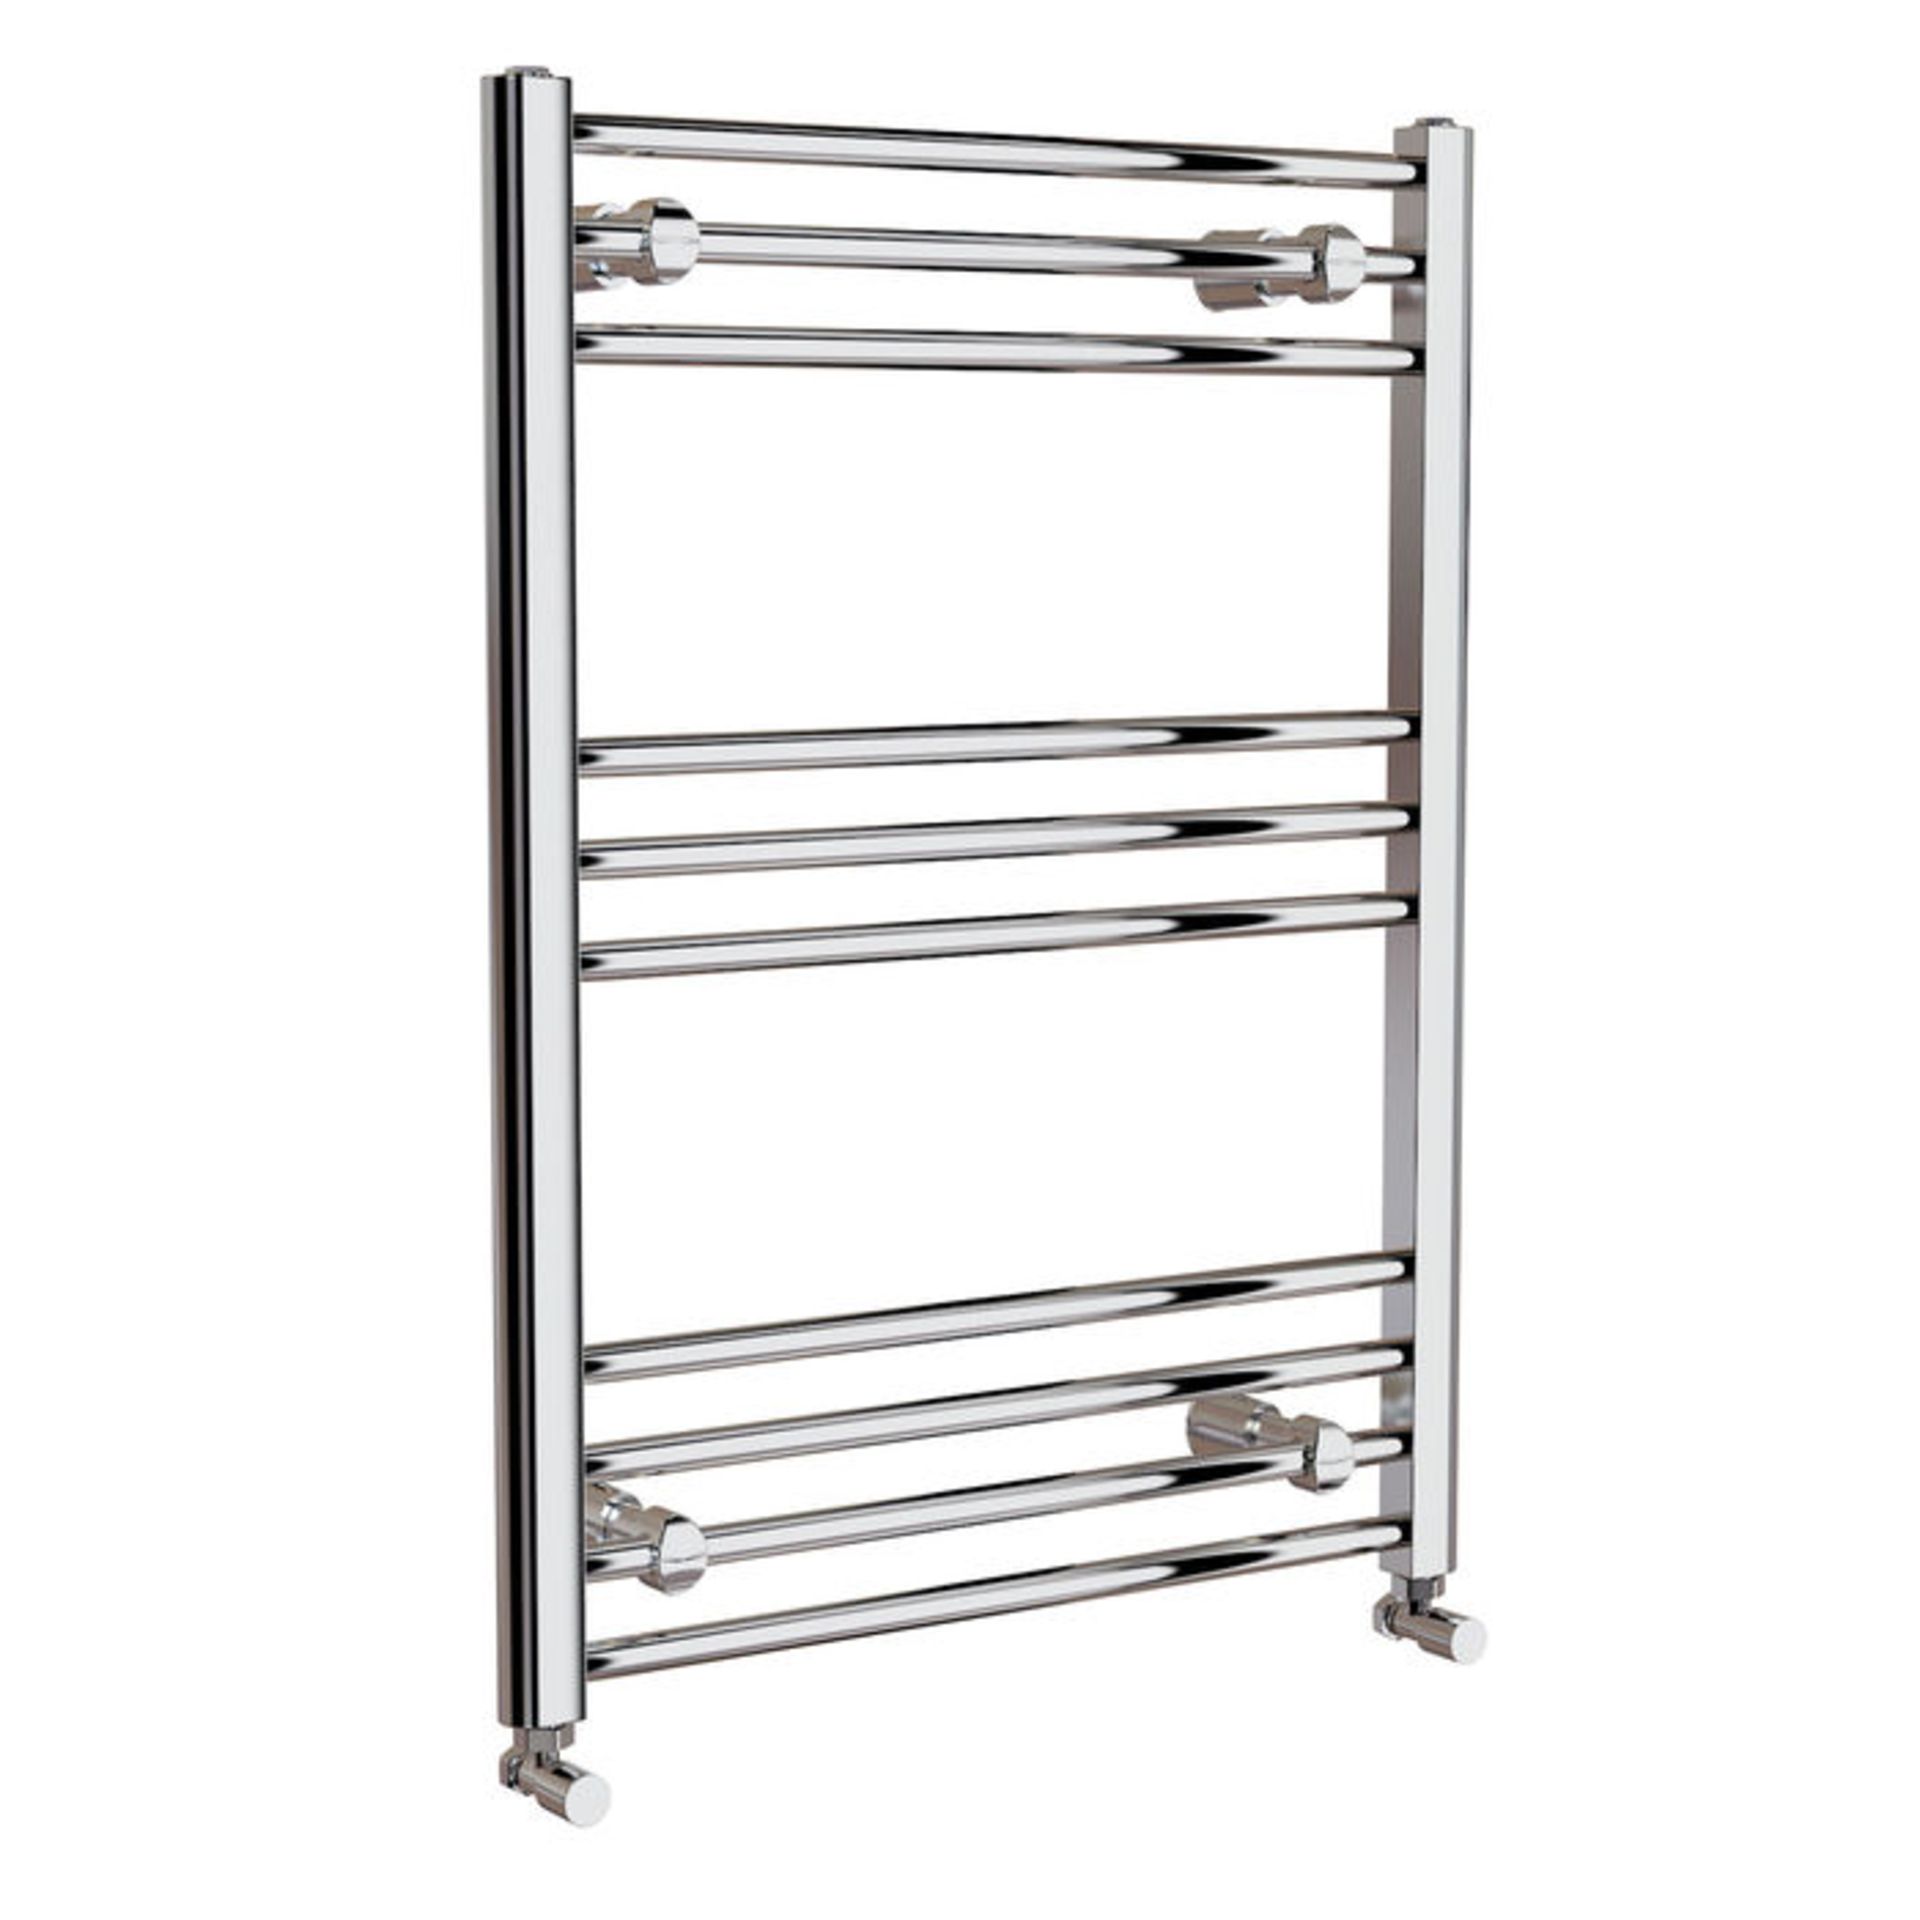 (M36) 800x600mm - 20mm Tubes - Chrome Heated Straight Rail Ladder Towel Radiator. Low carbon steel - Image 3 of 4